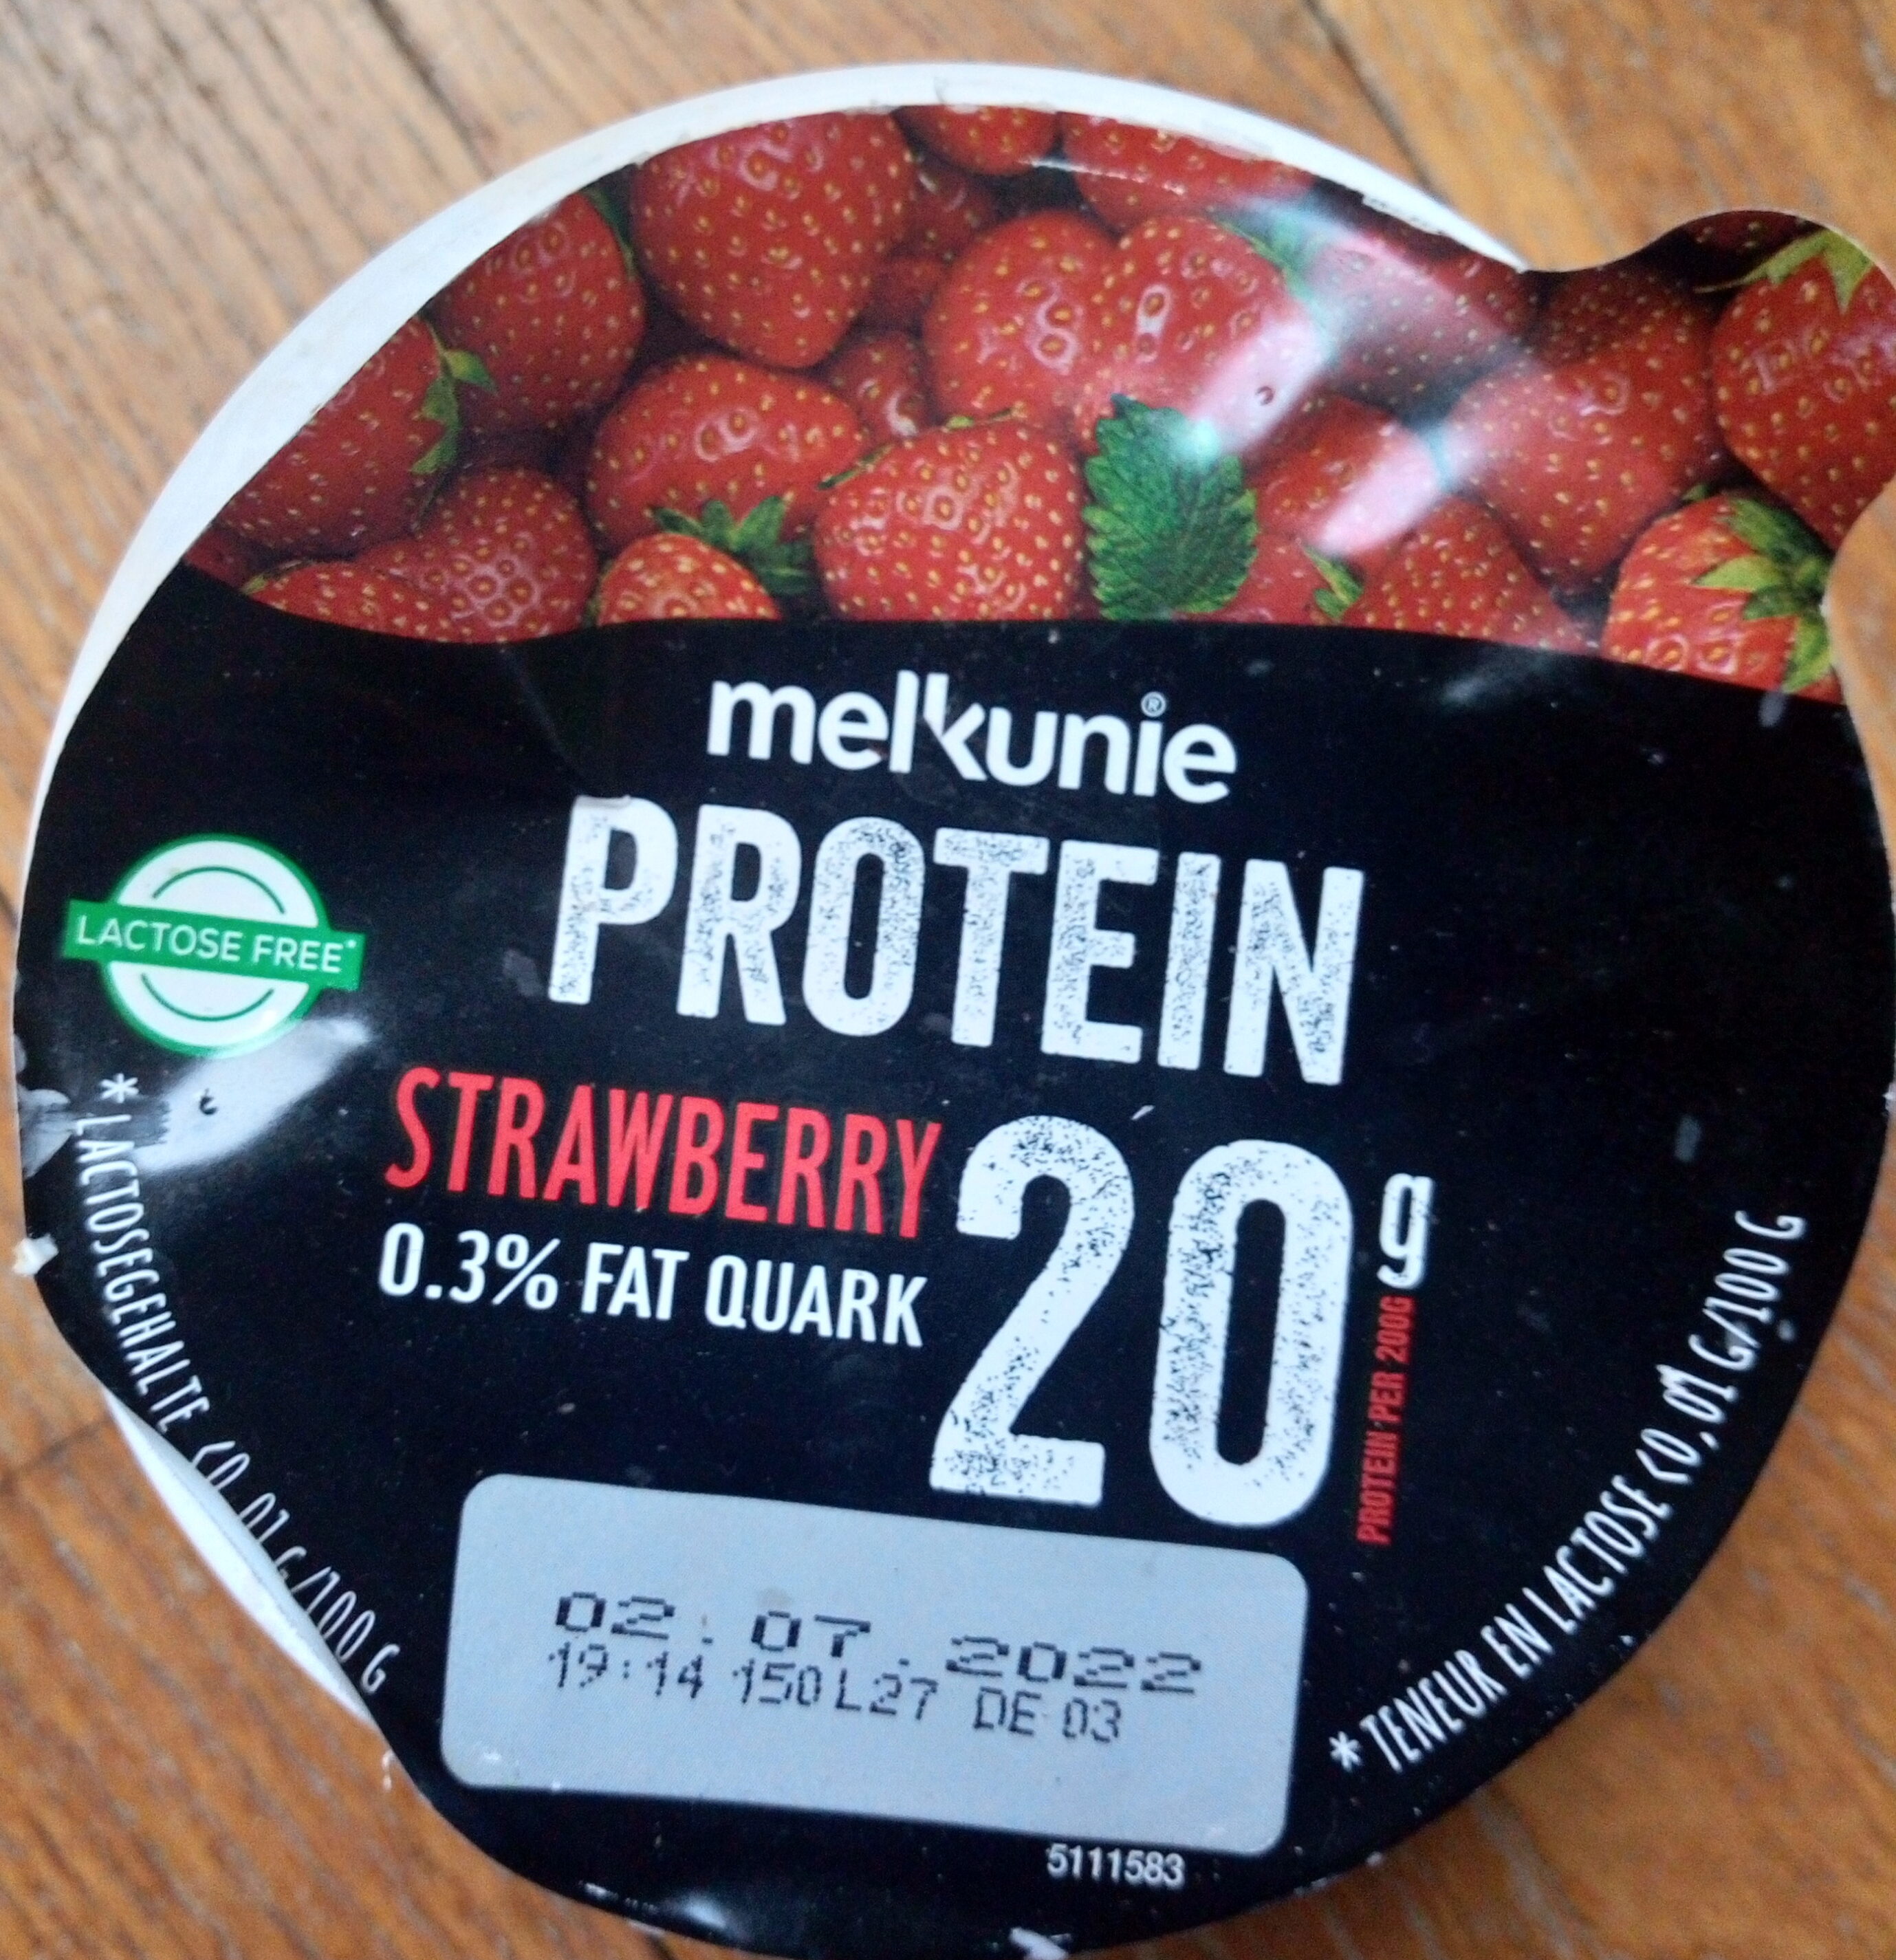 Protein strawberry - Instruction de recyclage et/ou informations d'emballage